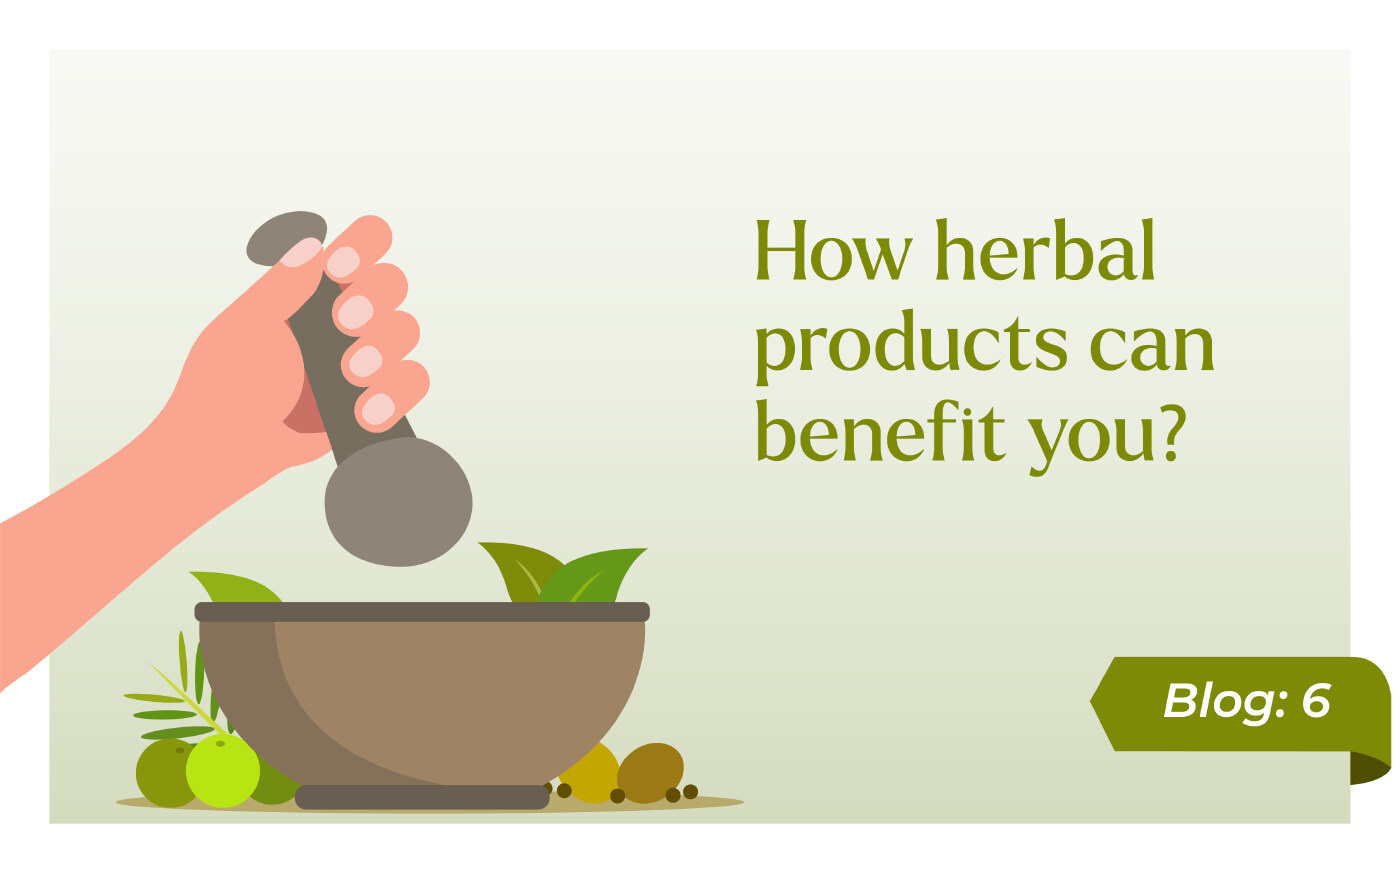 How herbal products can benefit you blog